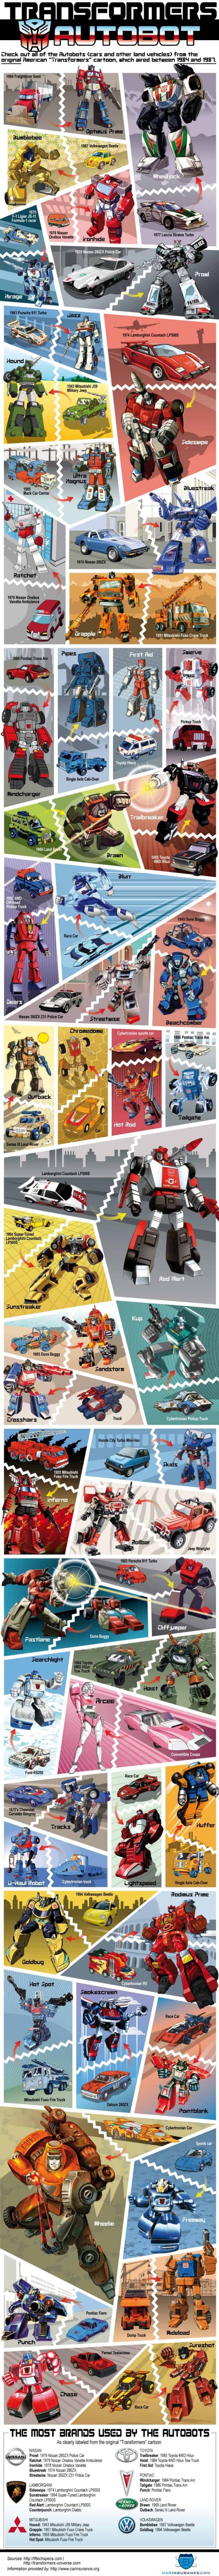 all autobots (cars and land vehicles) from the original transformers cartoon aired 1984-1987